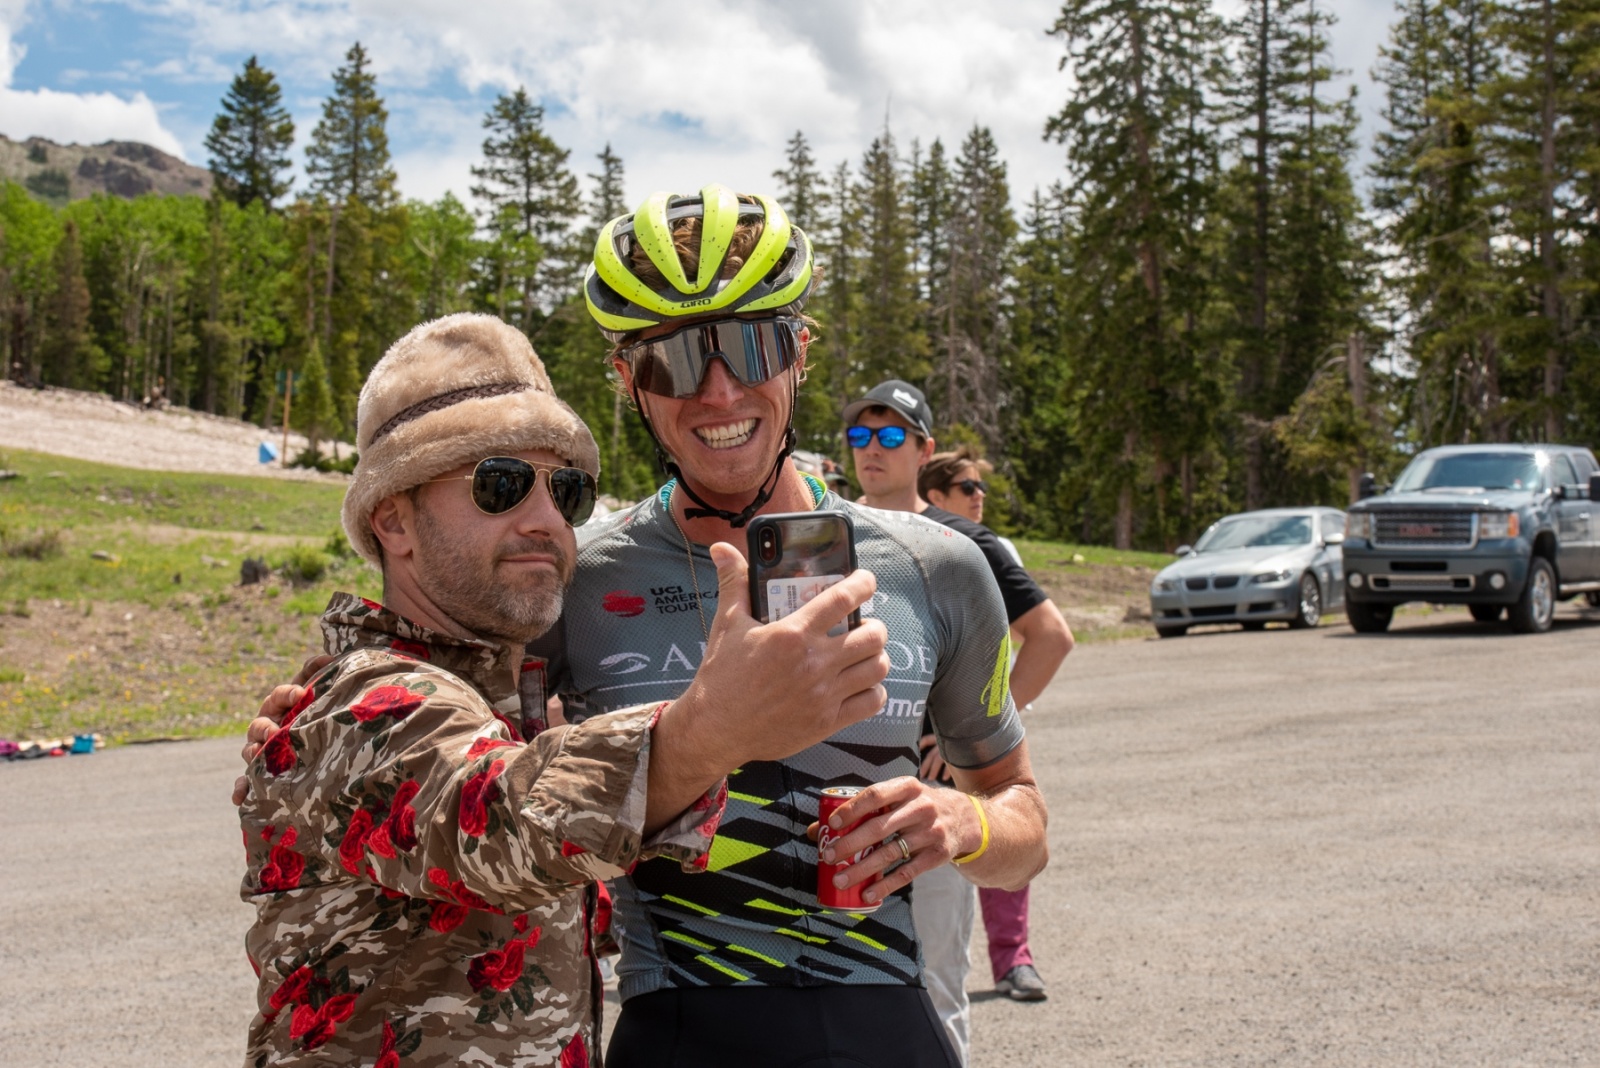 Race announcer Ali Goulet grabs a selfie with 6th place finisher TJ Eisenhart after the finish. Photo: Steven L. Sheffield.